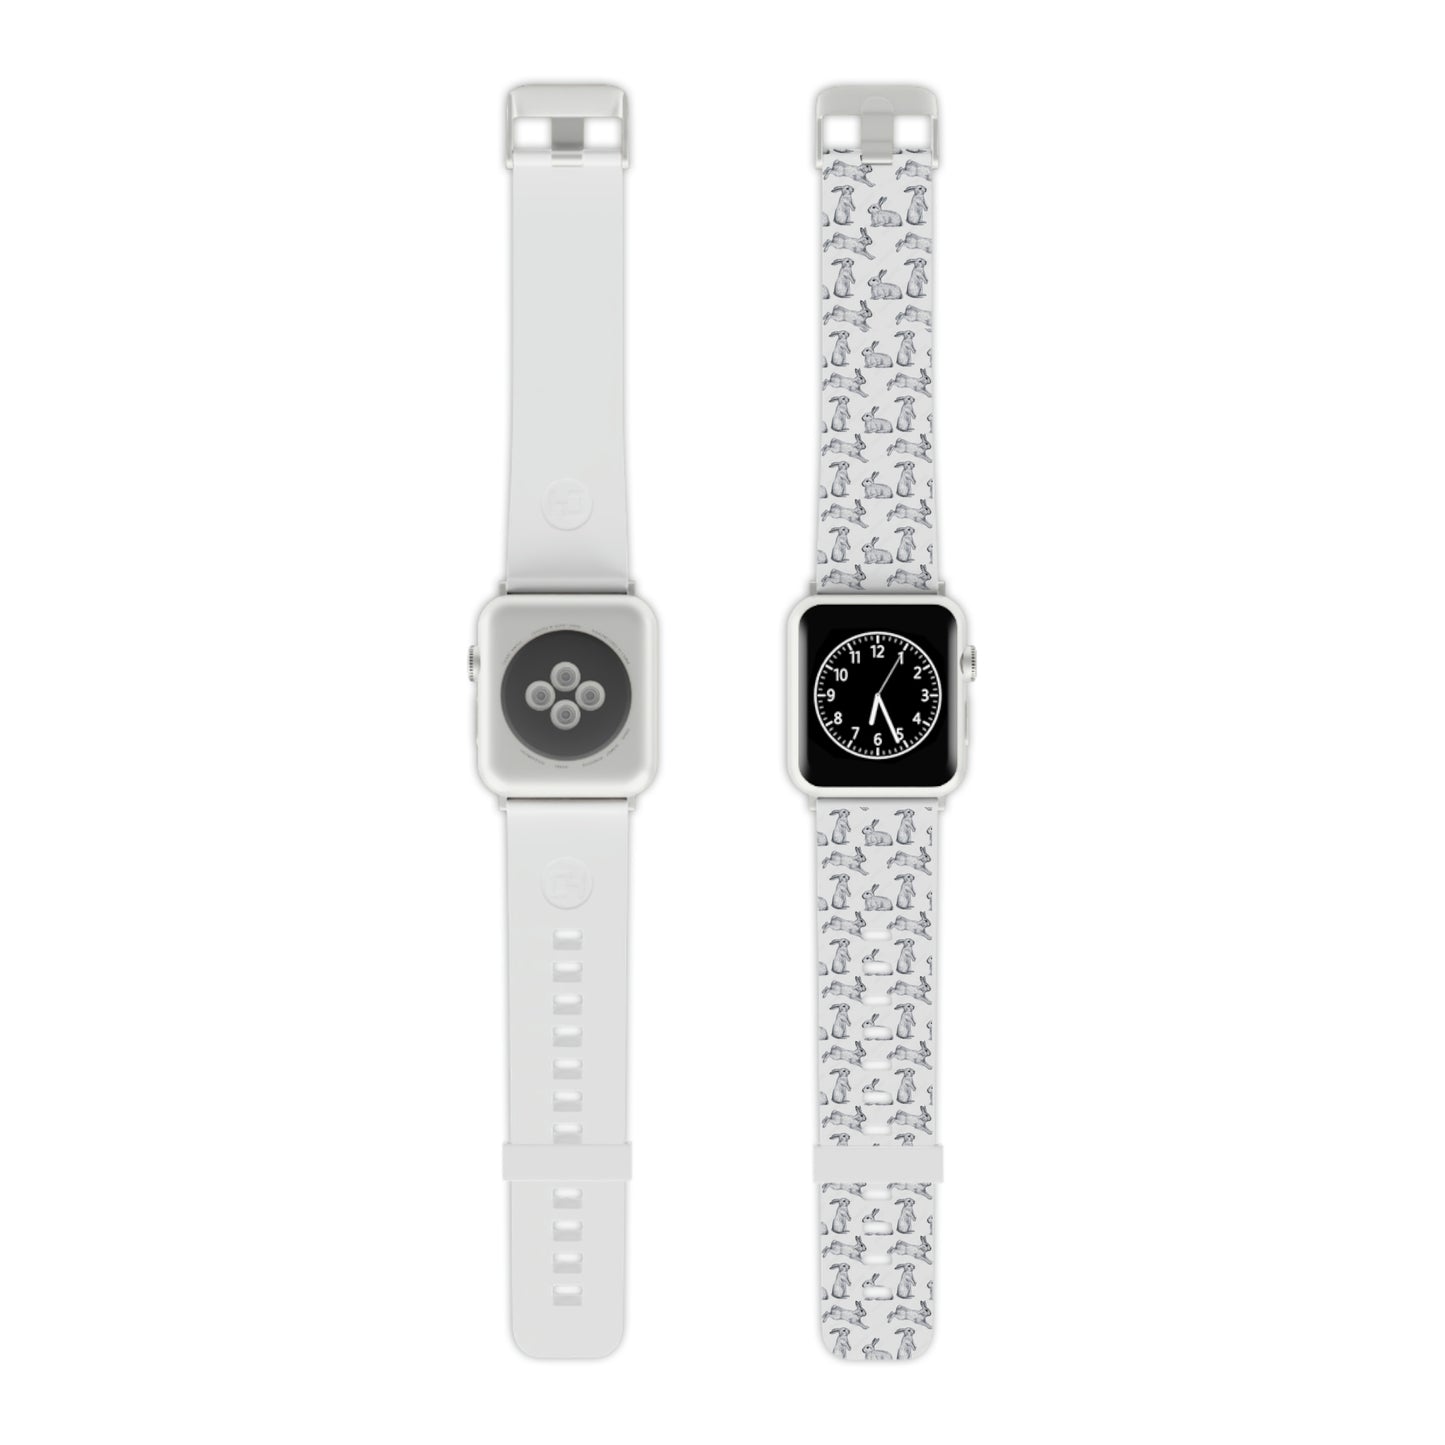 Hopping Bunnies Watch Band for Apple Watch